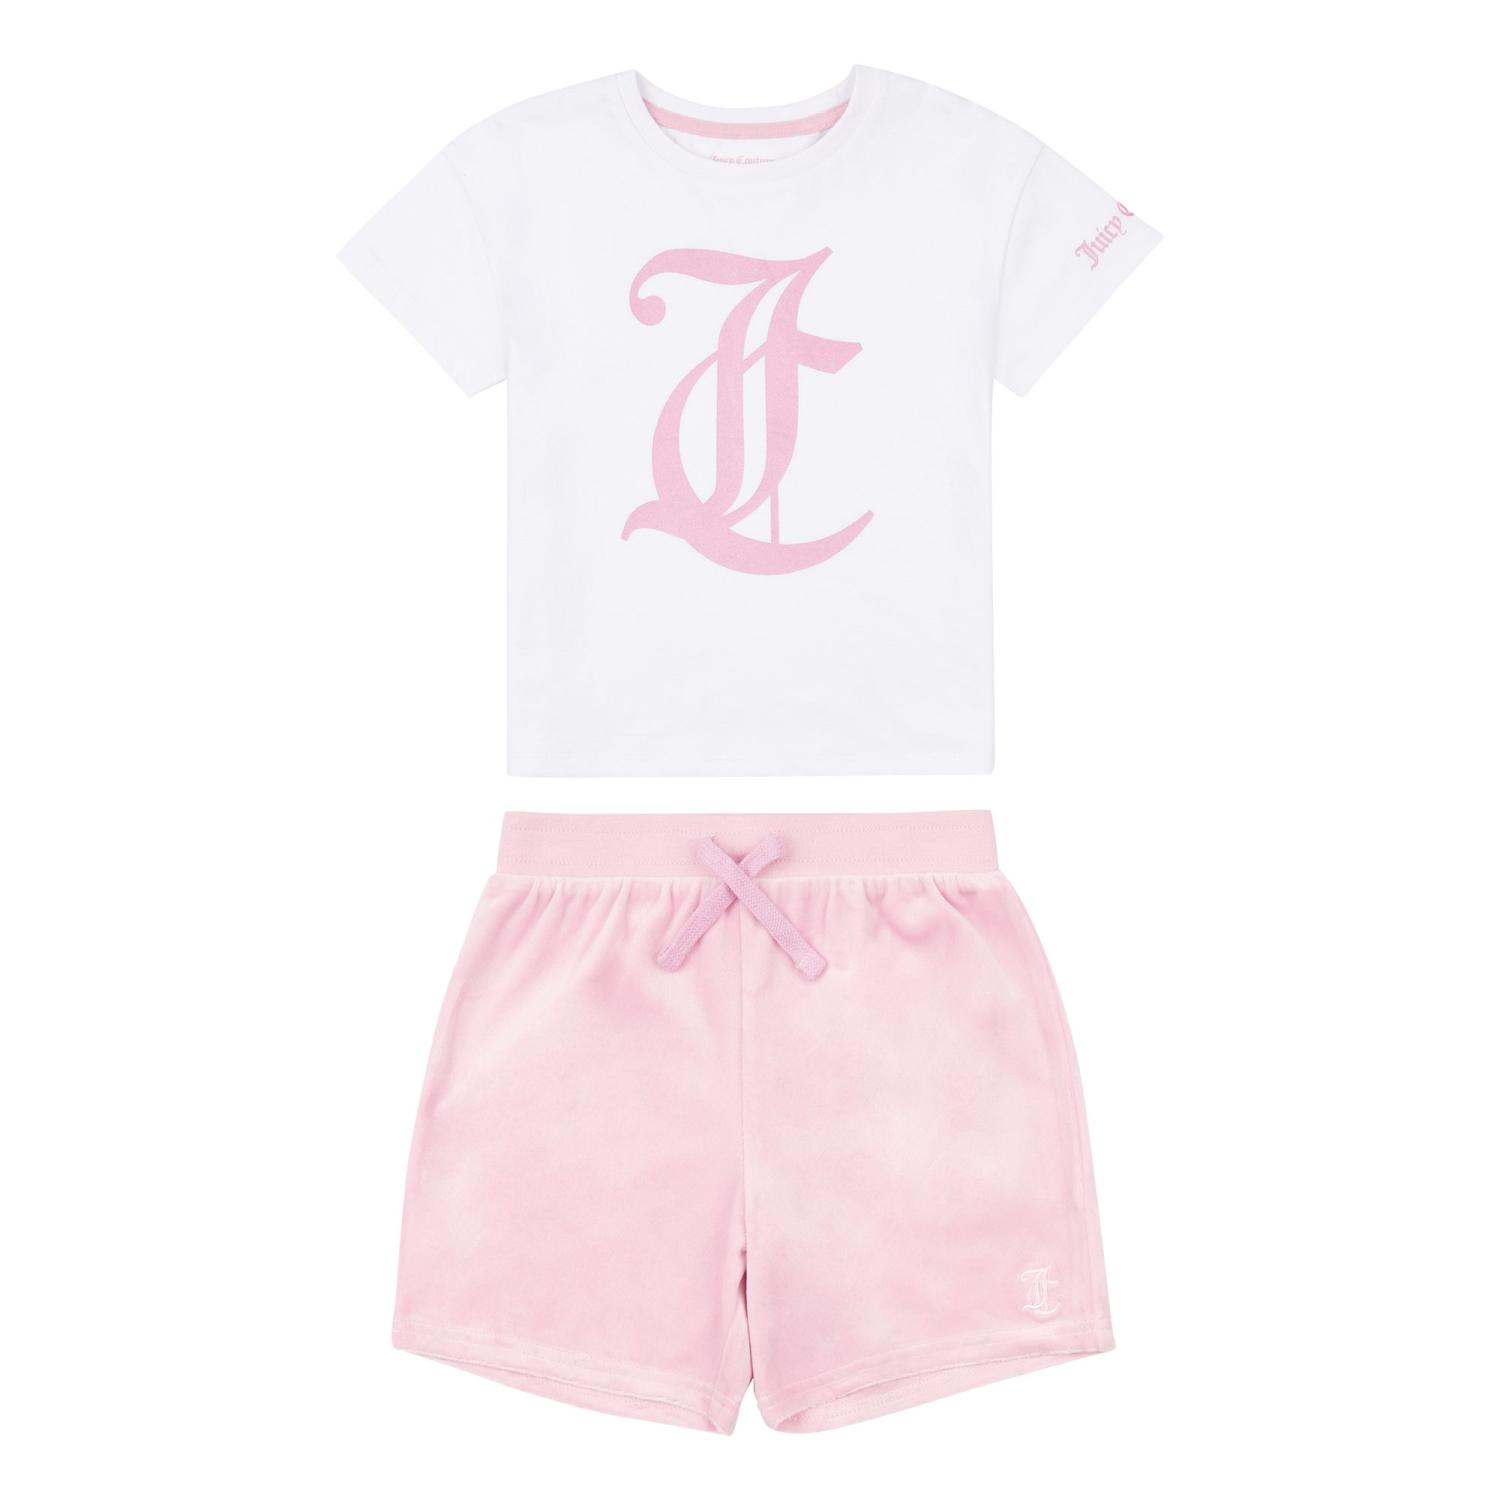 JUICY COUTURE SHORTS SET PINK